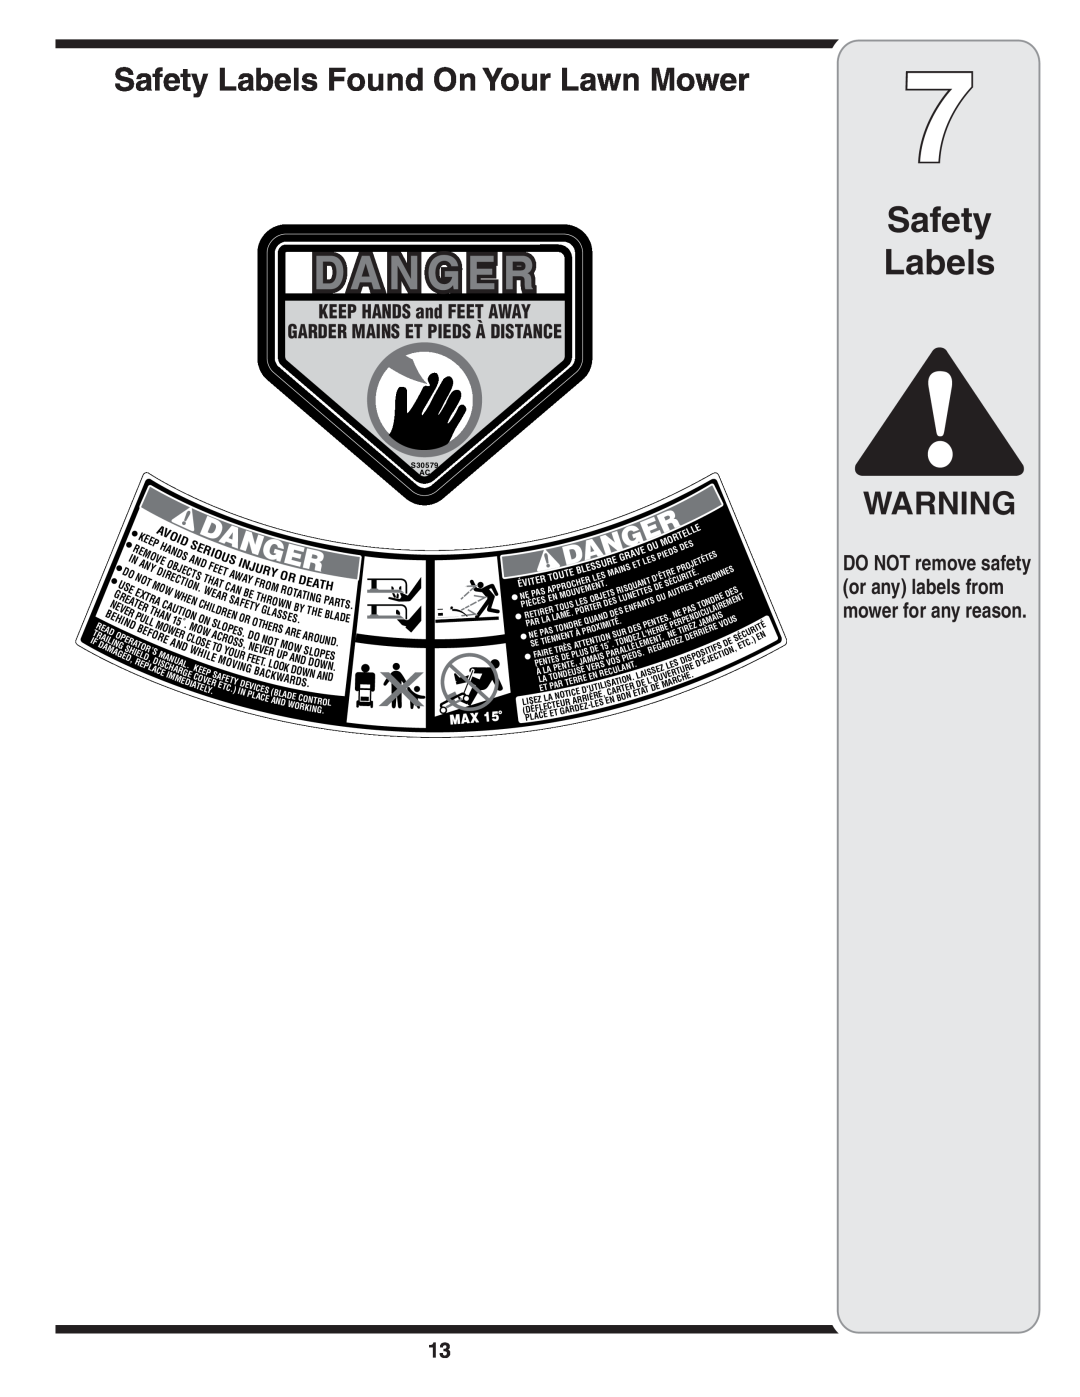 MTD 80 warranty Safety Labels Found On Your Lawn Mower, KEEP HANDS and FEET AWAY GARDER MAINS ET PIEDS À DISTANCE 